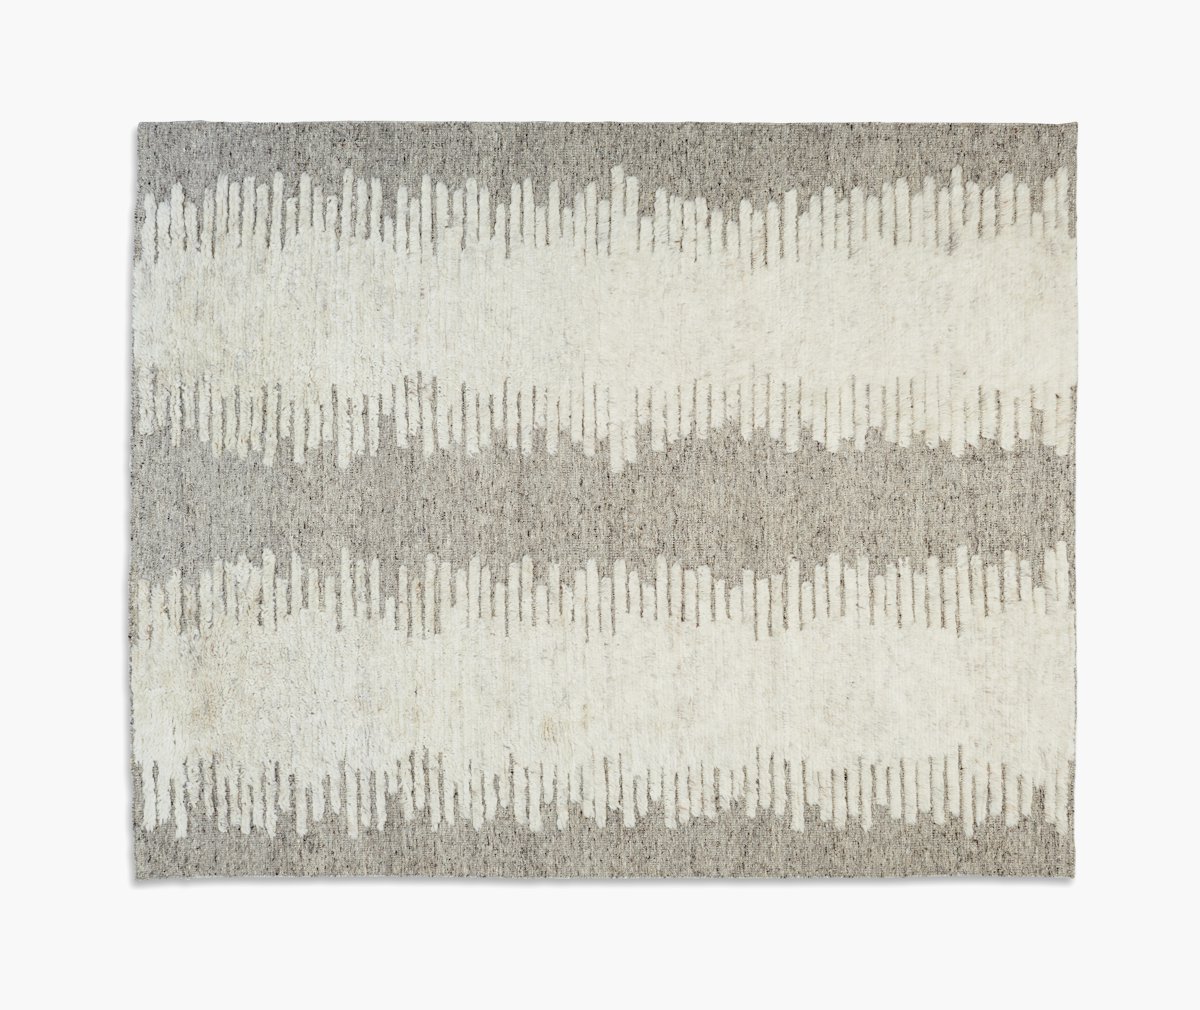 Dor Handknotted Moroccan Wool Rug